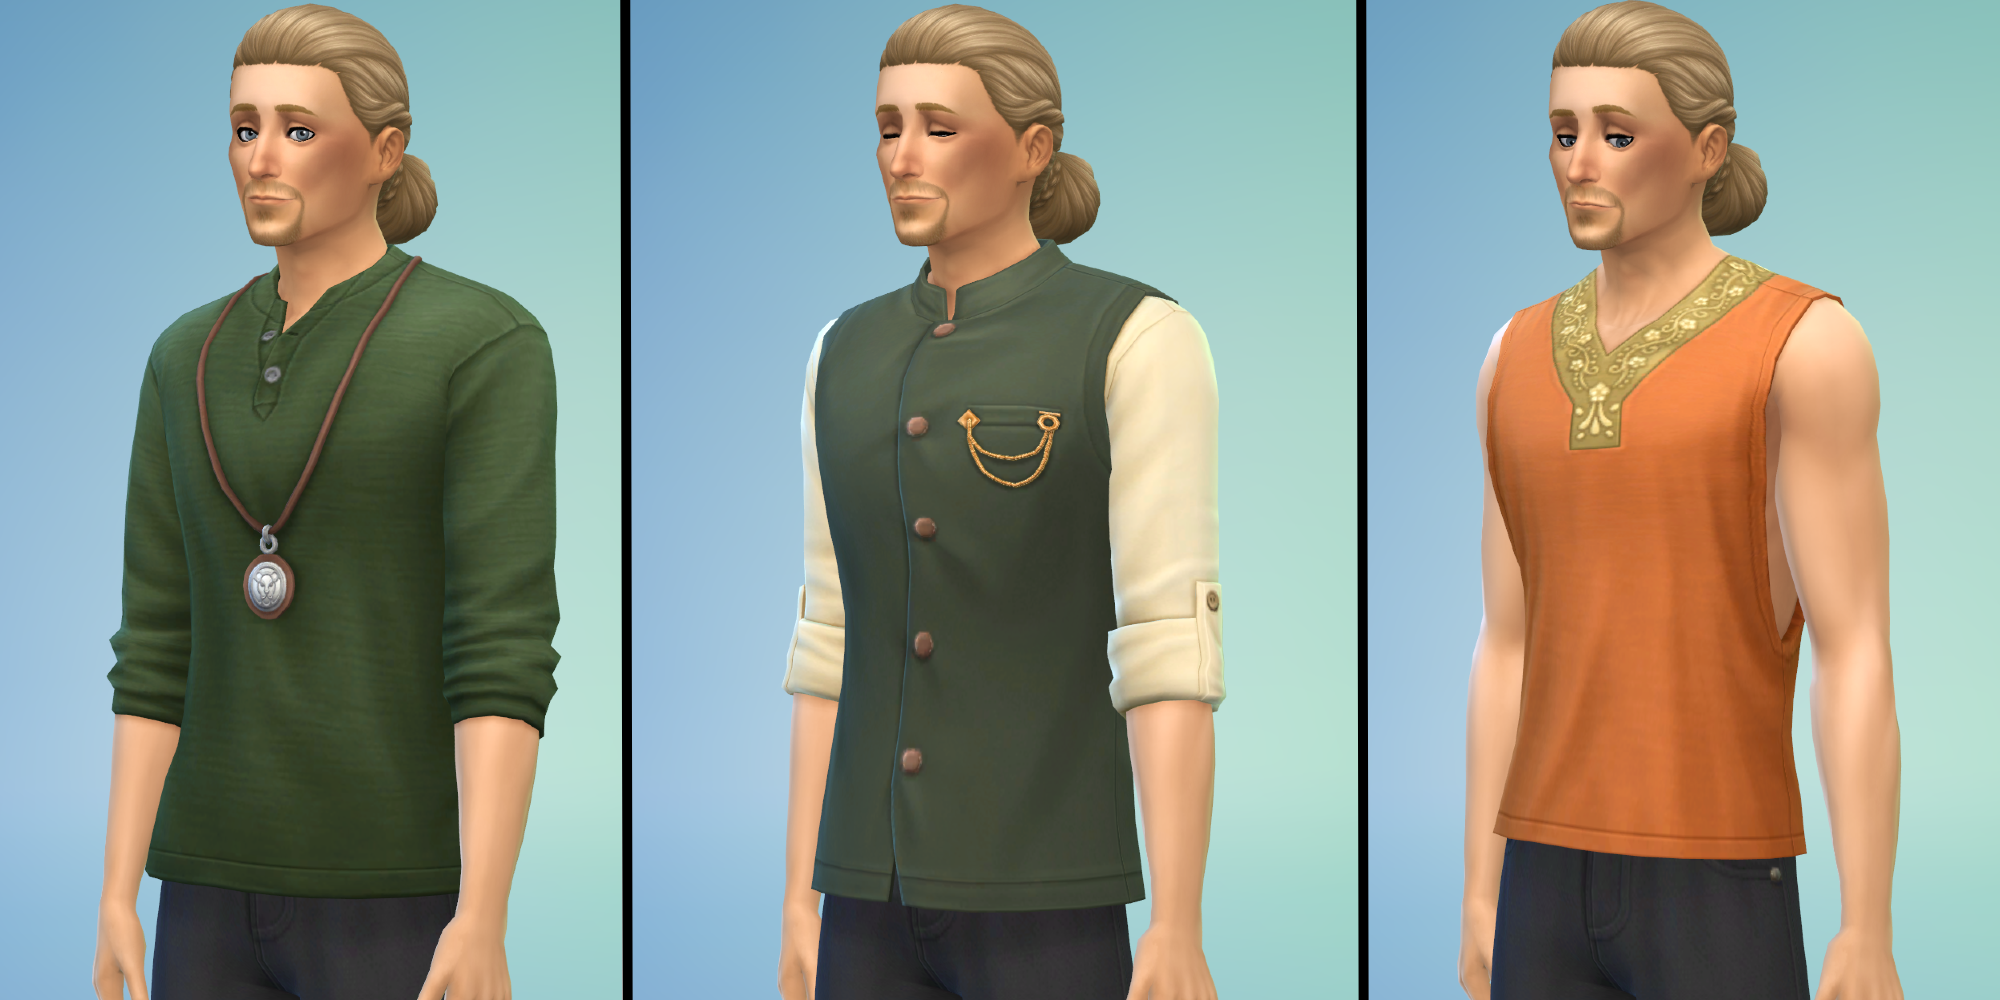 Sims 4: Fashion Steet Kit, Masculine Tops with default swatches, in the CAS Screen